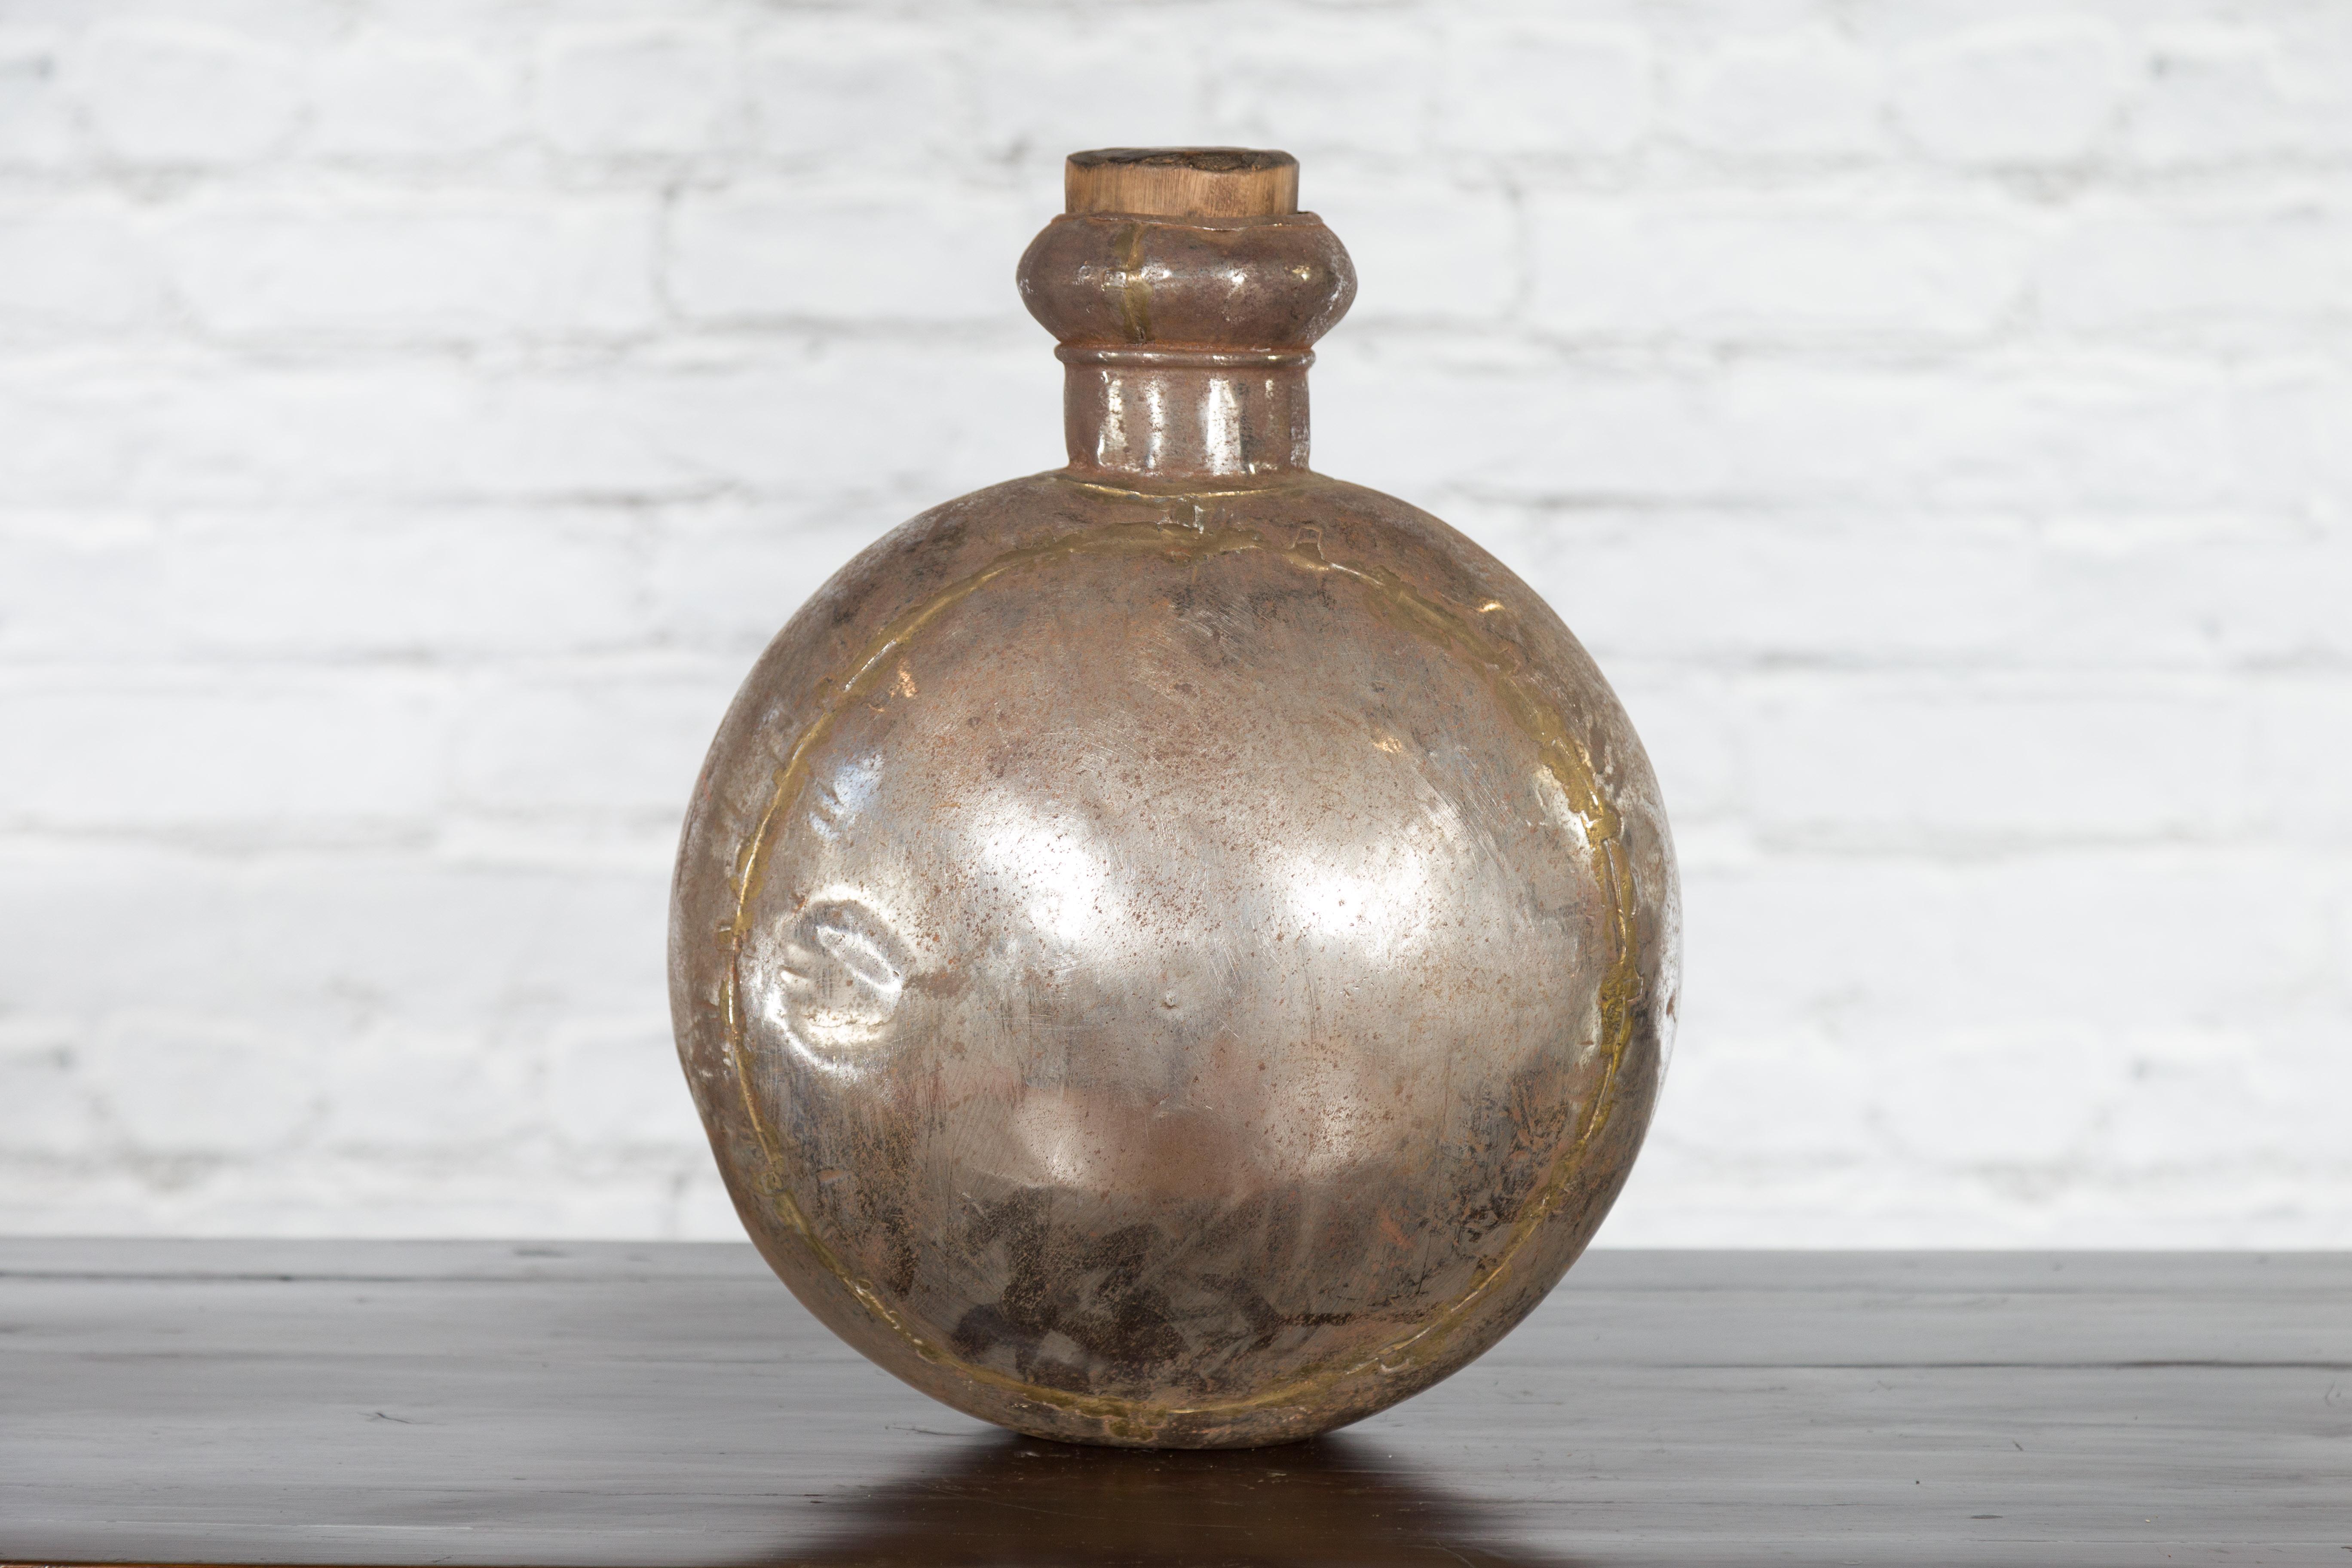 Indian Vintage Metal Water Vase with Cork Style Top and Circular Body In Good Condition For Sale In Yonkers, NY